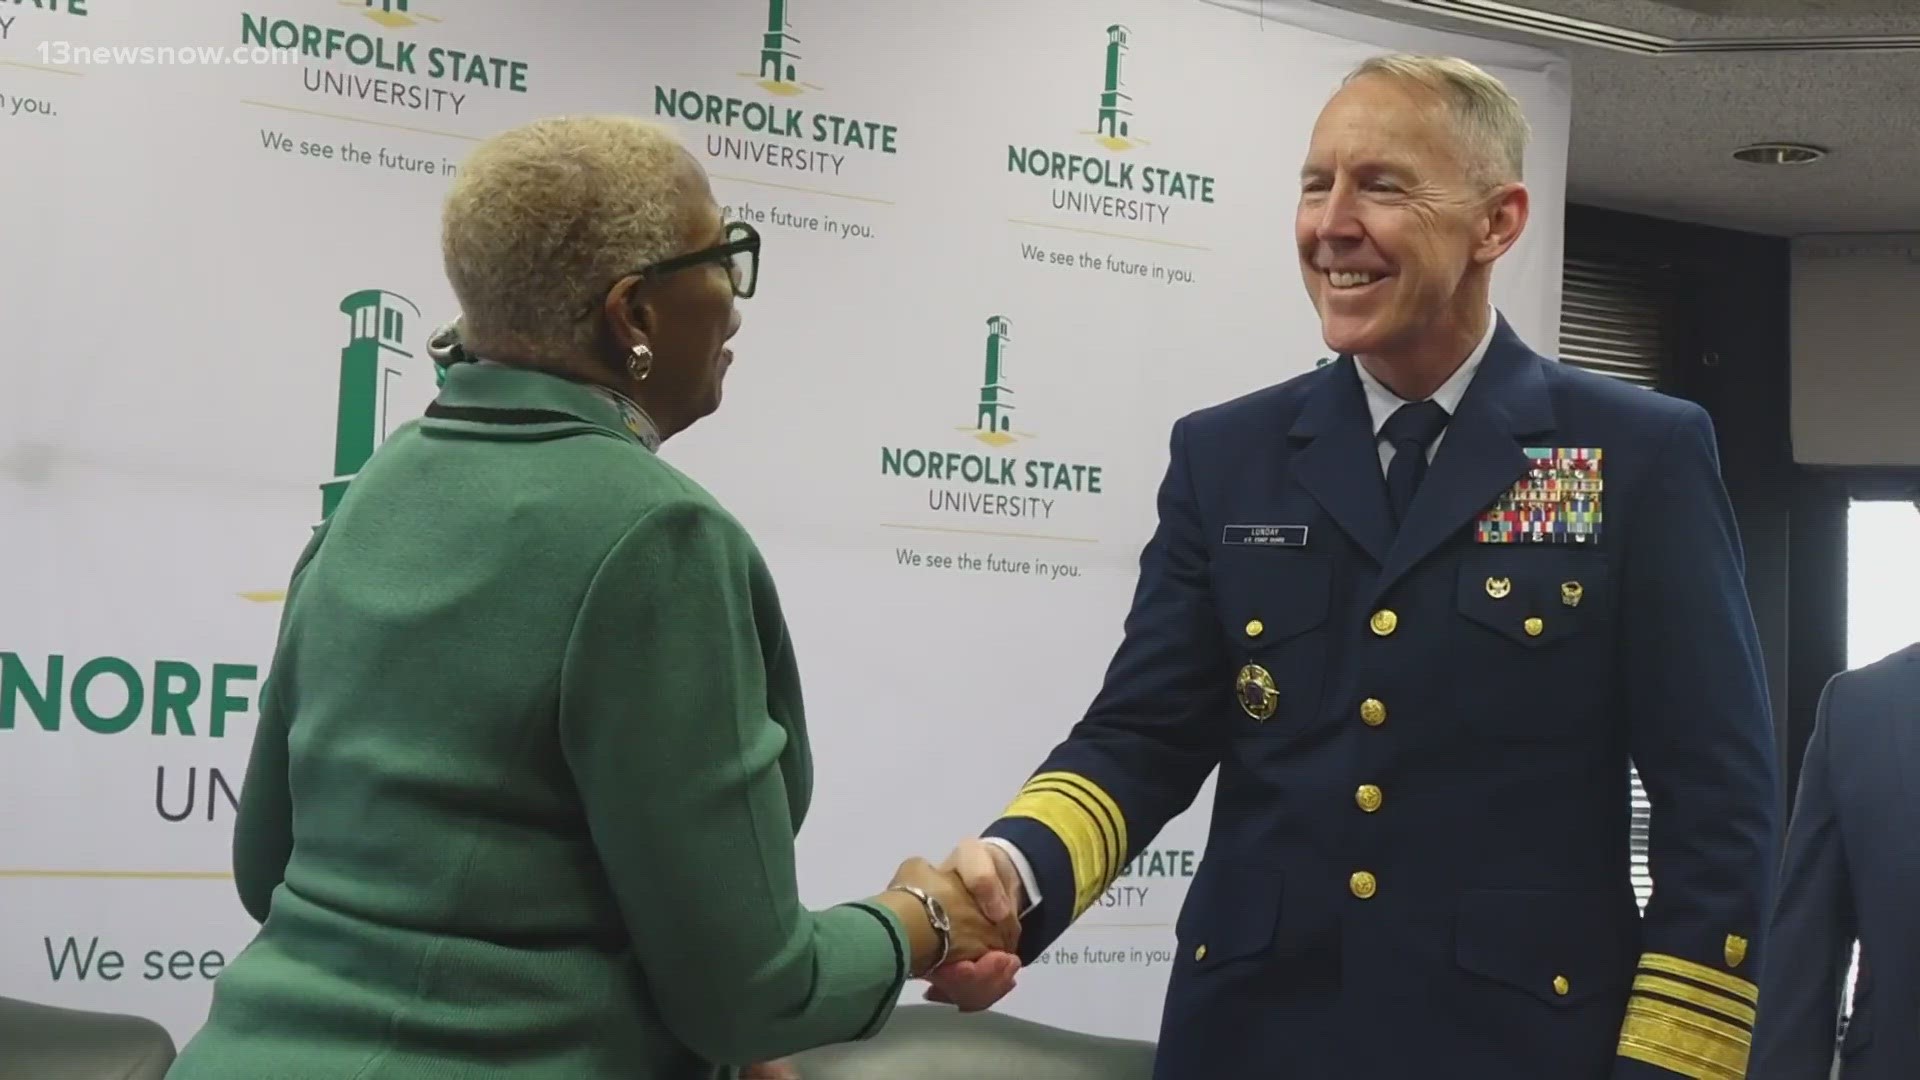 Norfolk State University will continue its partnership with the U.S. Coast Guard to support recruiting efforts.